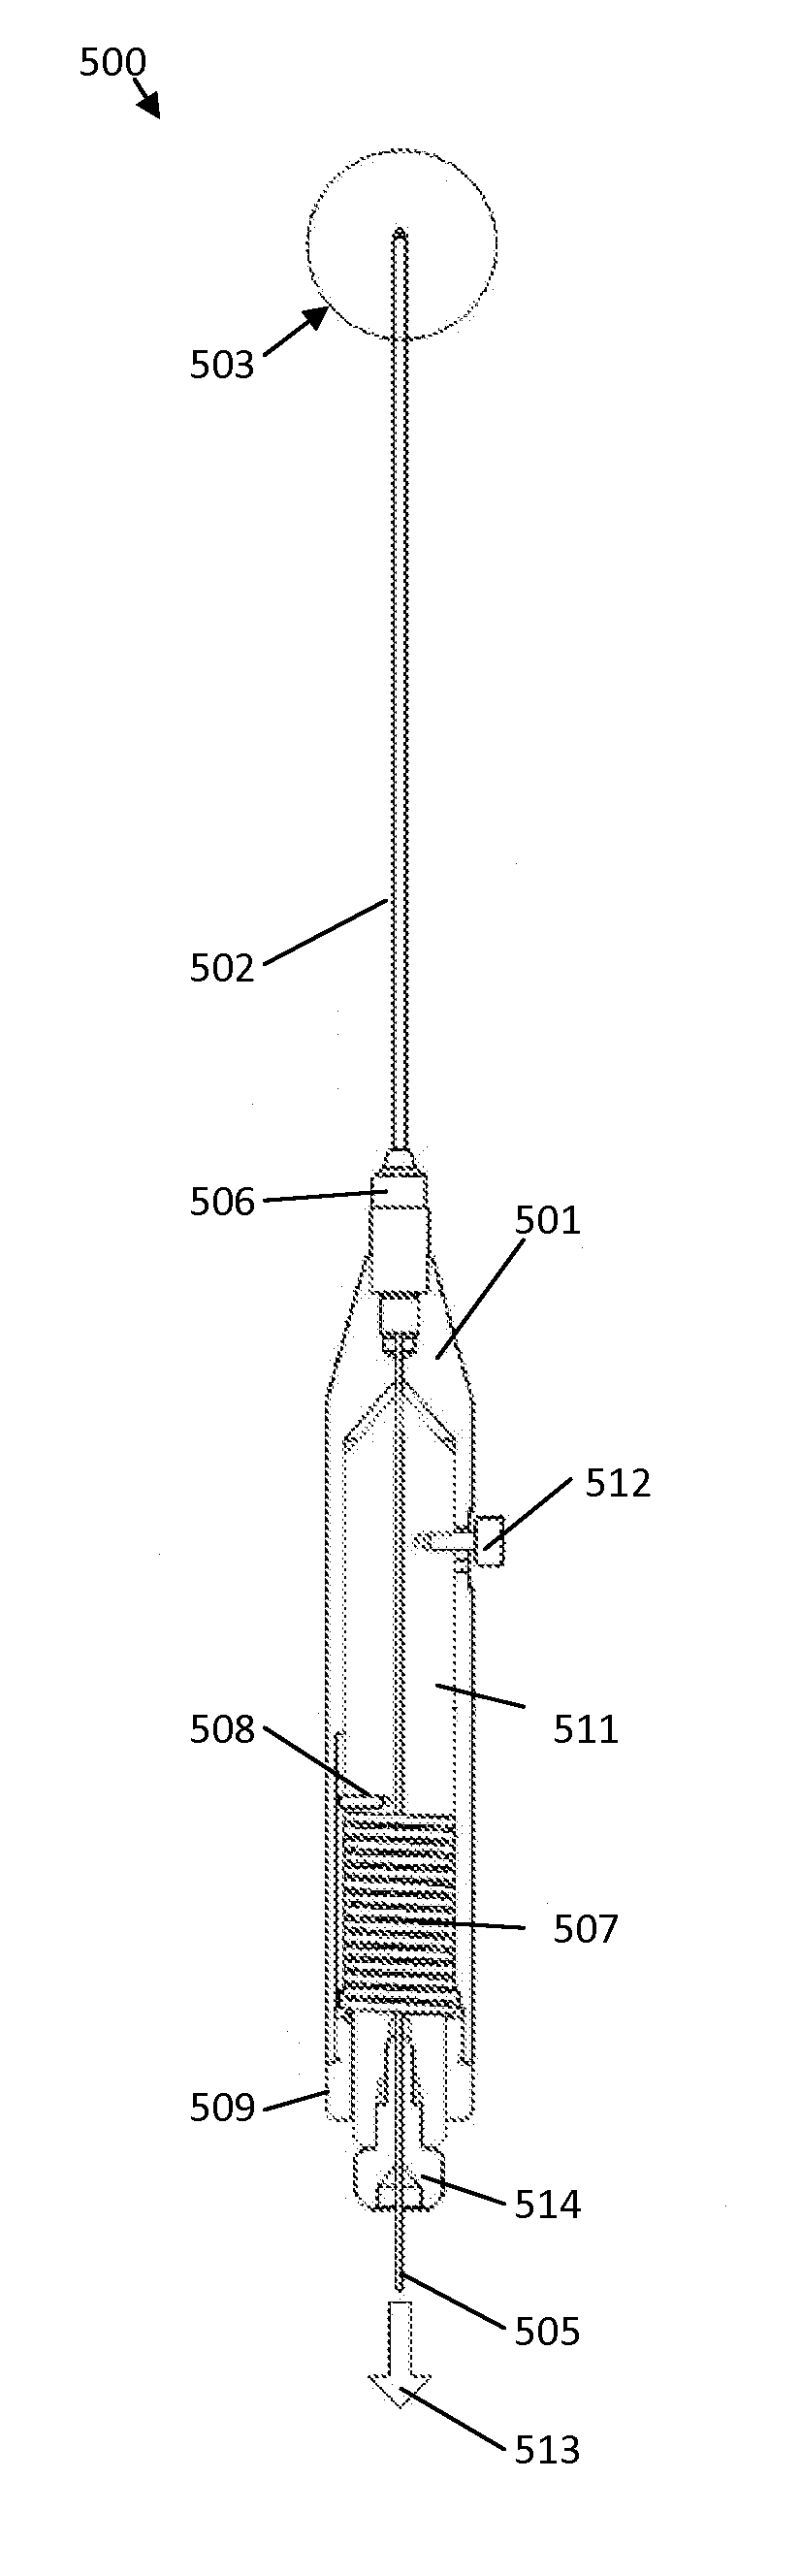 Laser Device and Method for Decreasing the Size and/or Changing the Shape of Pelvic Tissues